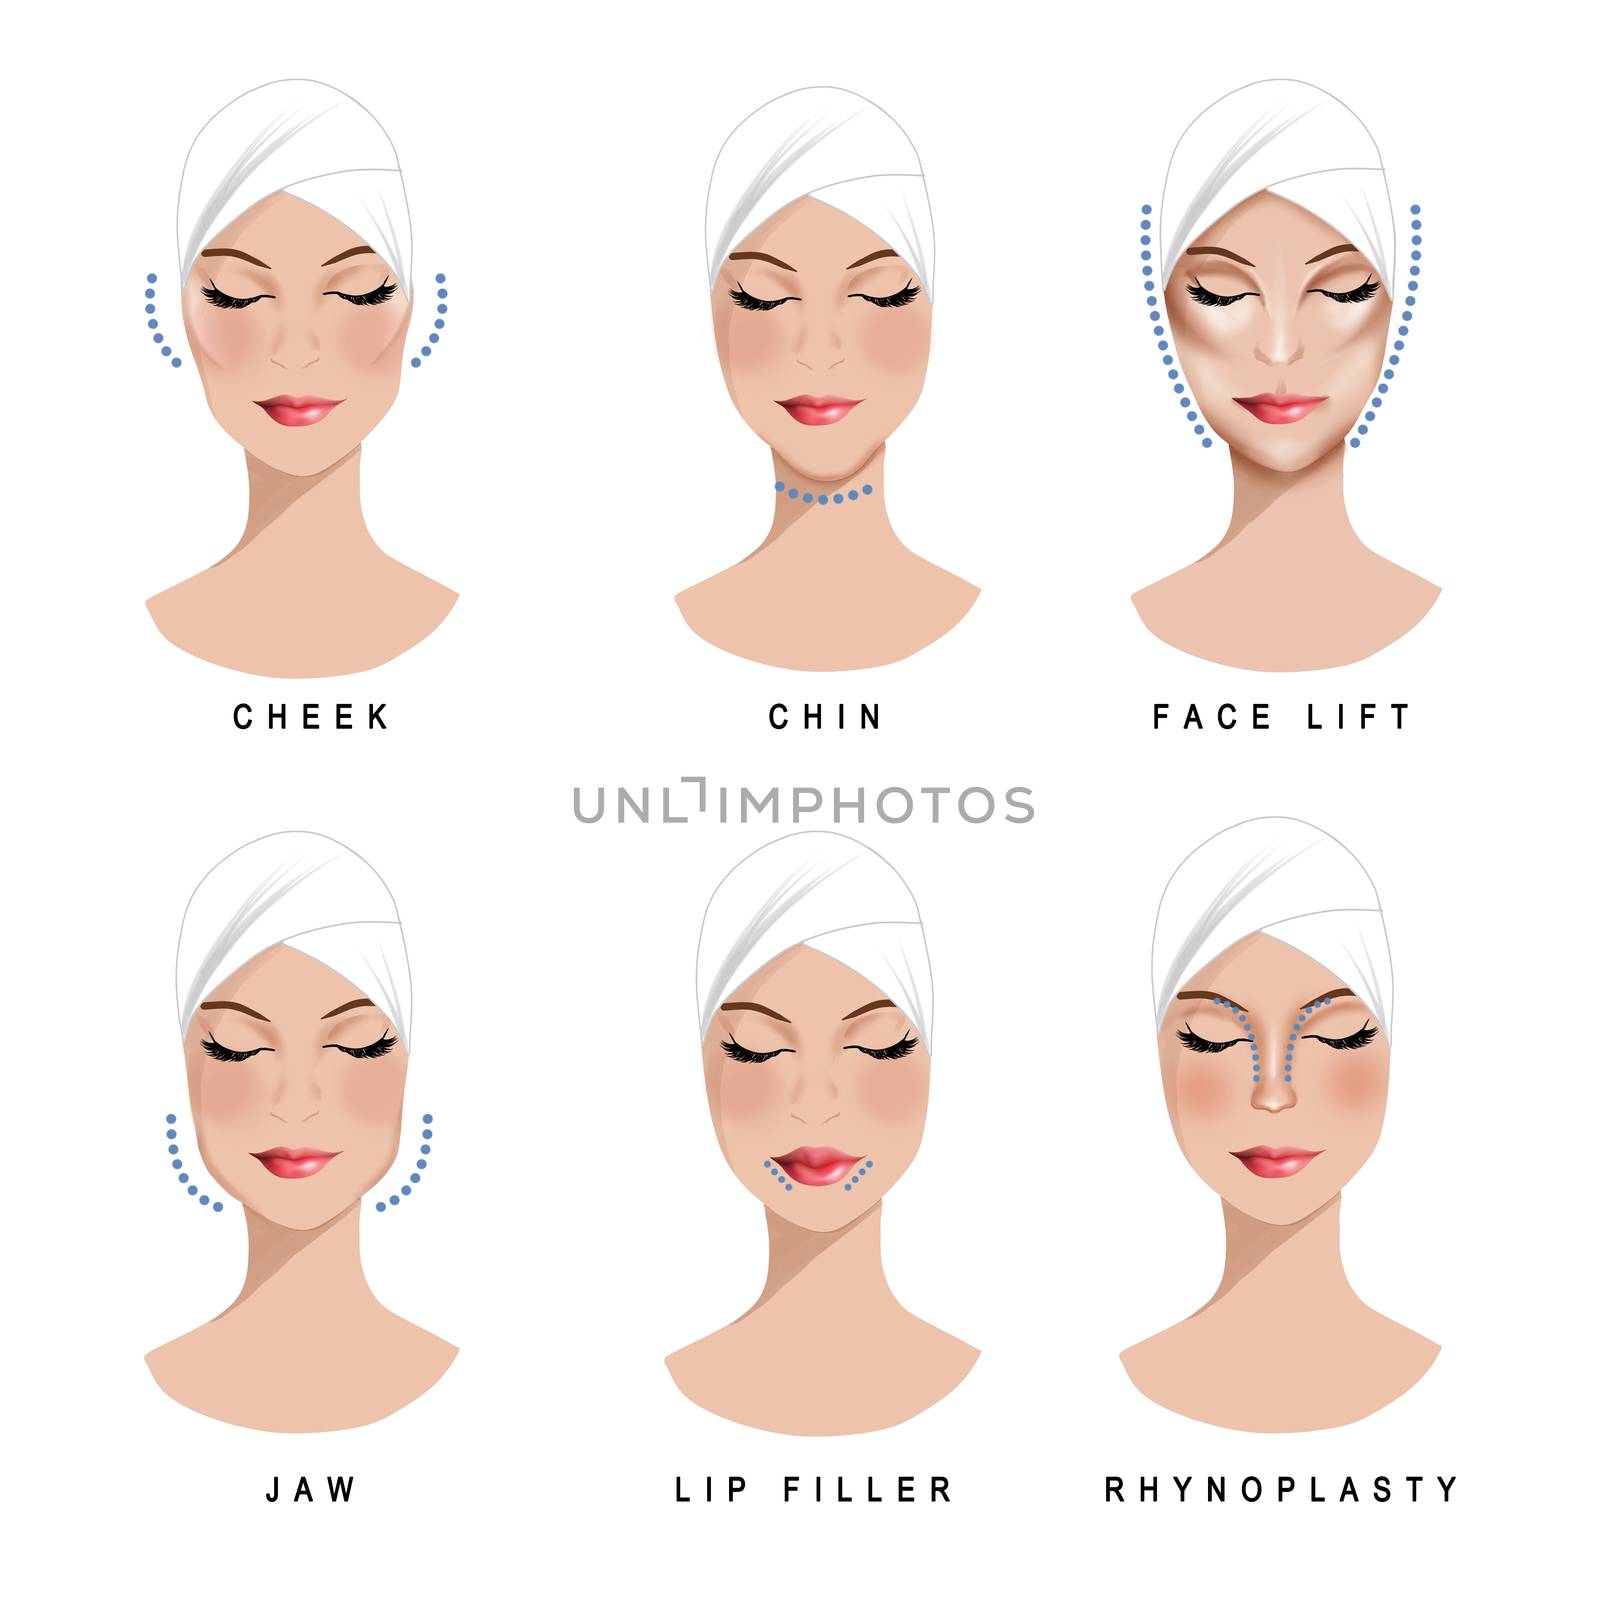 Beauty and surgery treatments set of clipart by GGillustrations